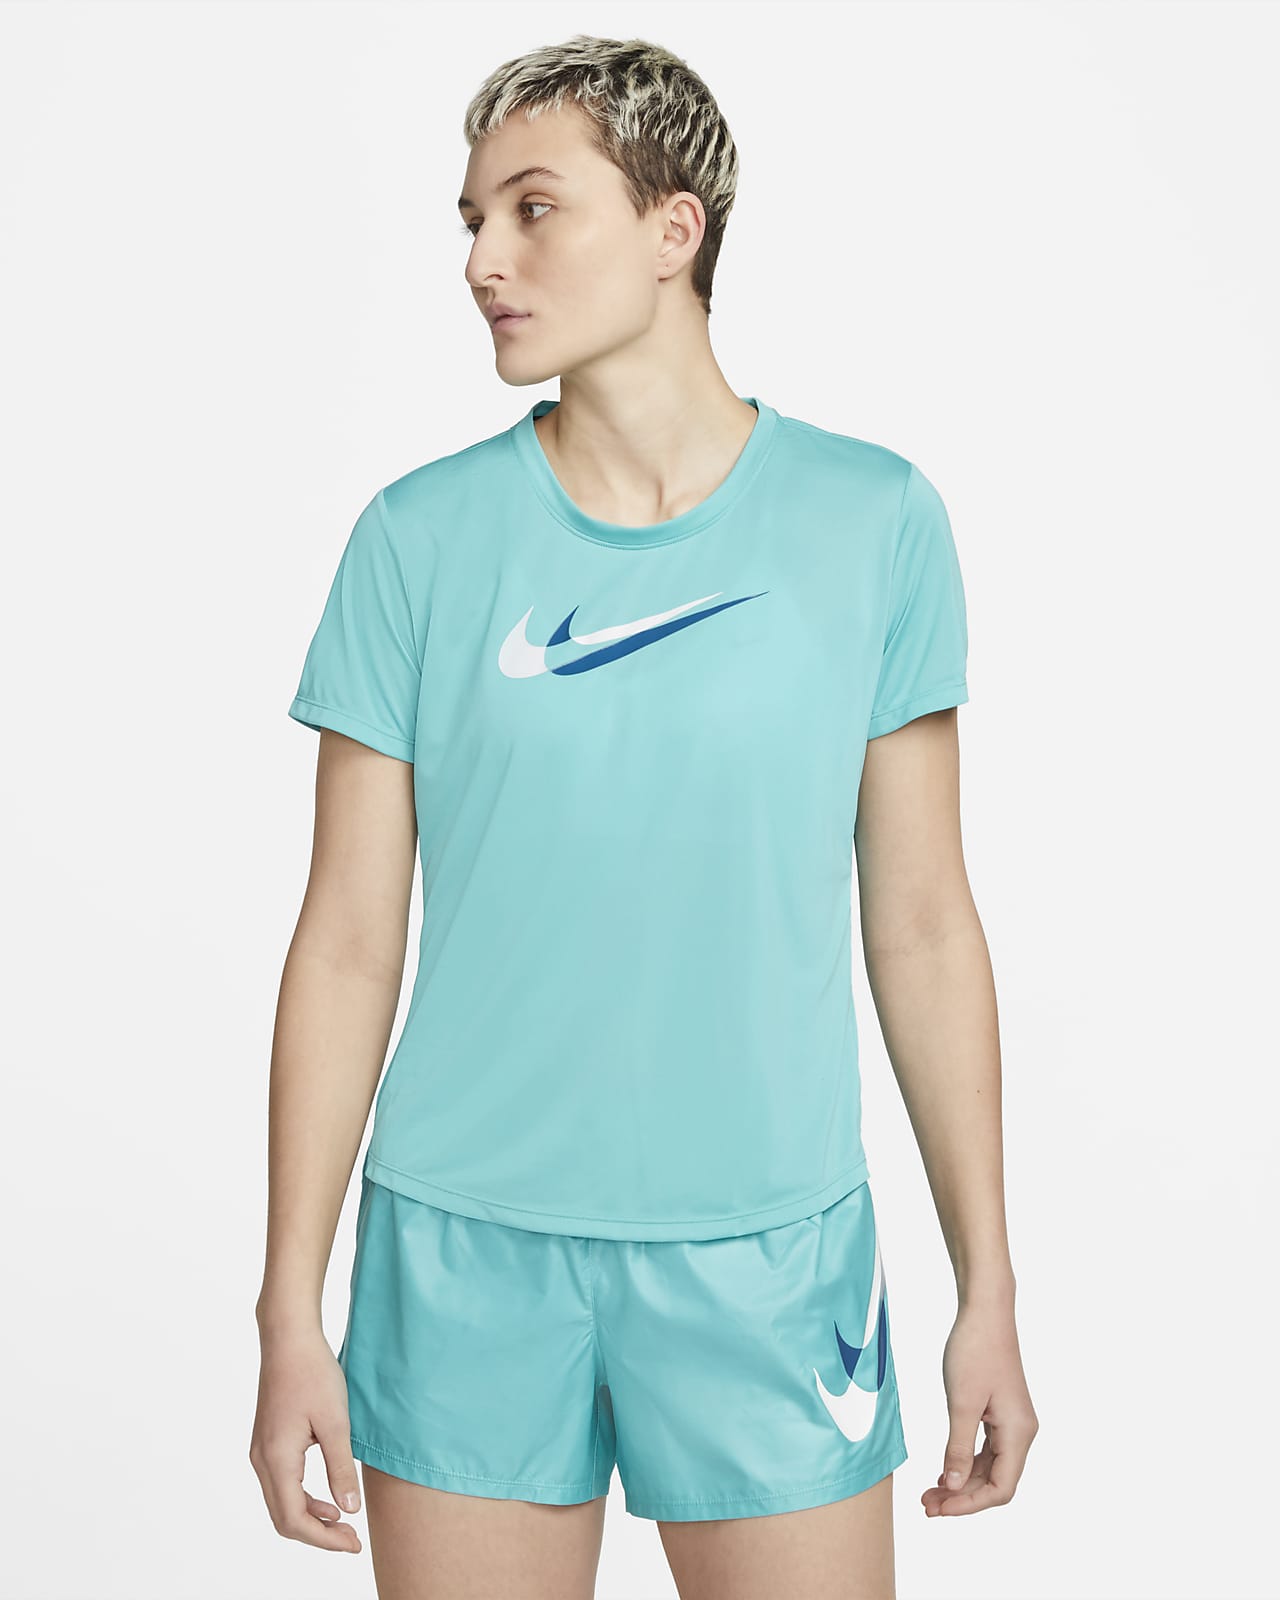 https://static.nike.com/a/images/t_PDP_1280_v1/f_auto,q_auto:eco/0ee7c4dd-d6c6-4d22-80e9-82eb63c26157/dri-fit-swoosh-run-short-sleeve-running-top-sBmBHd.png